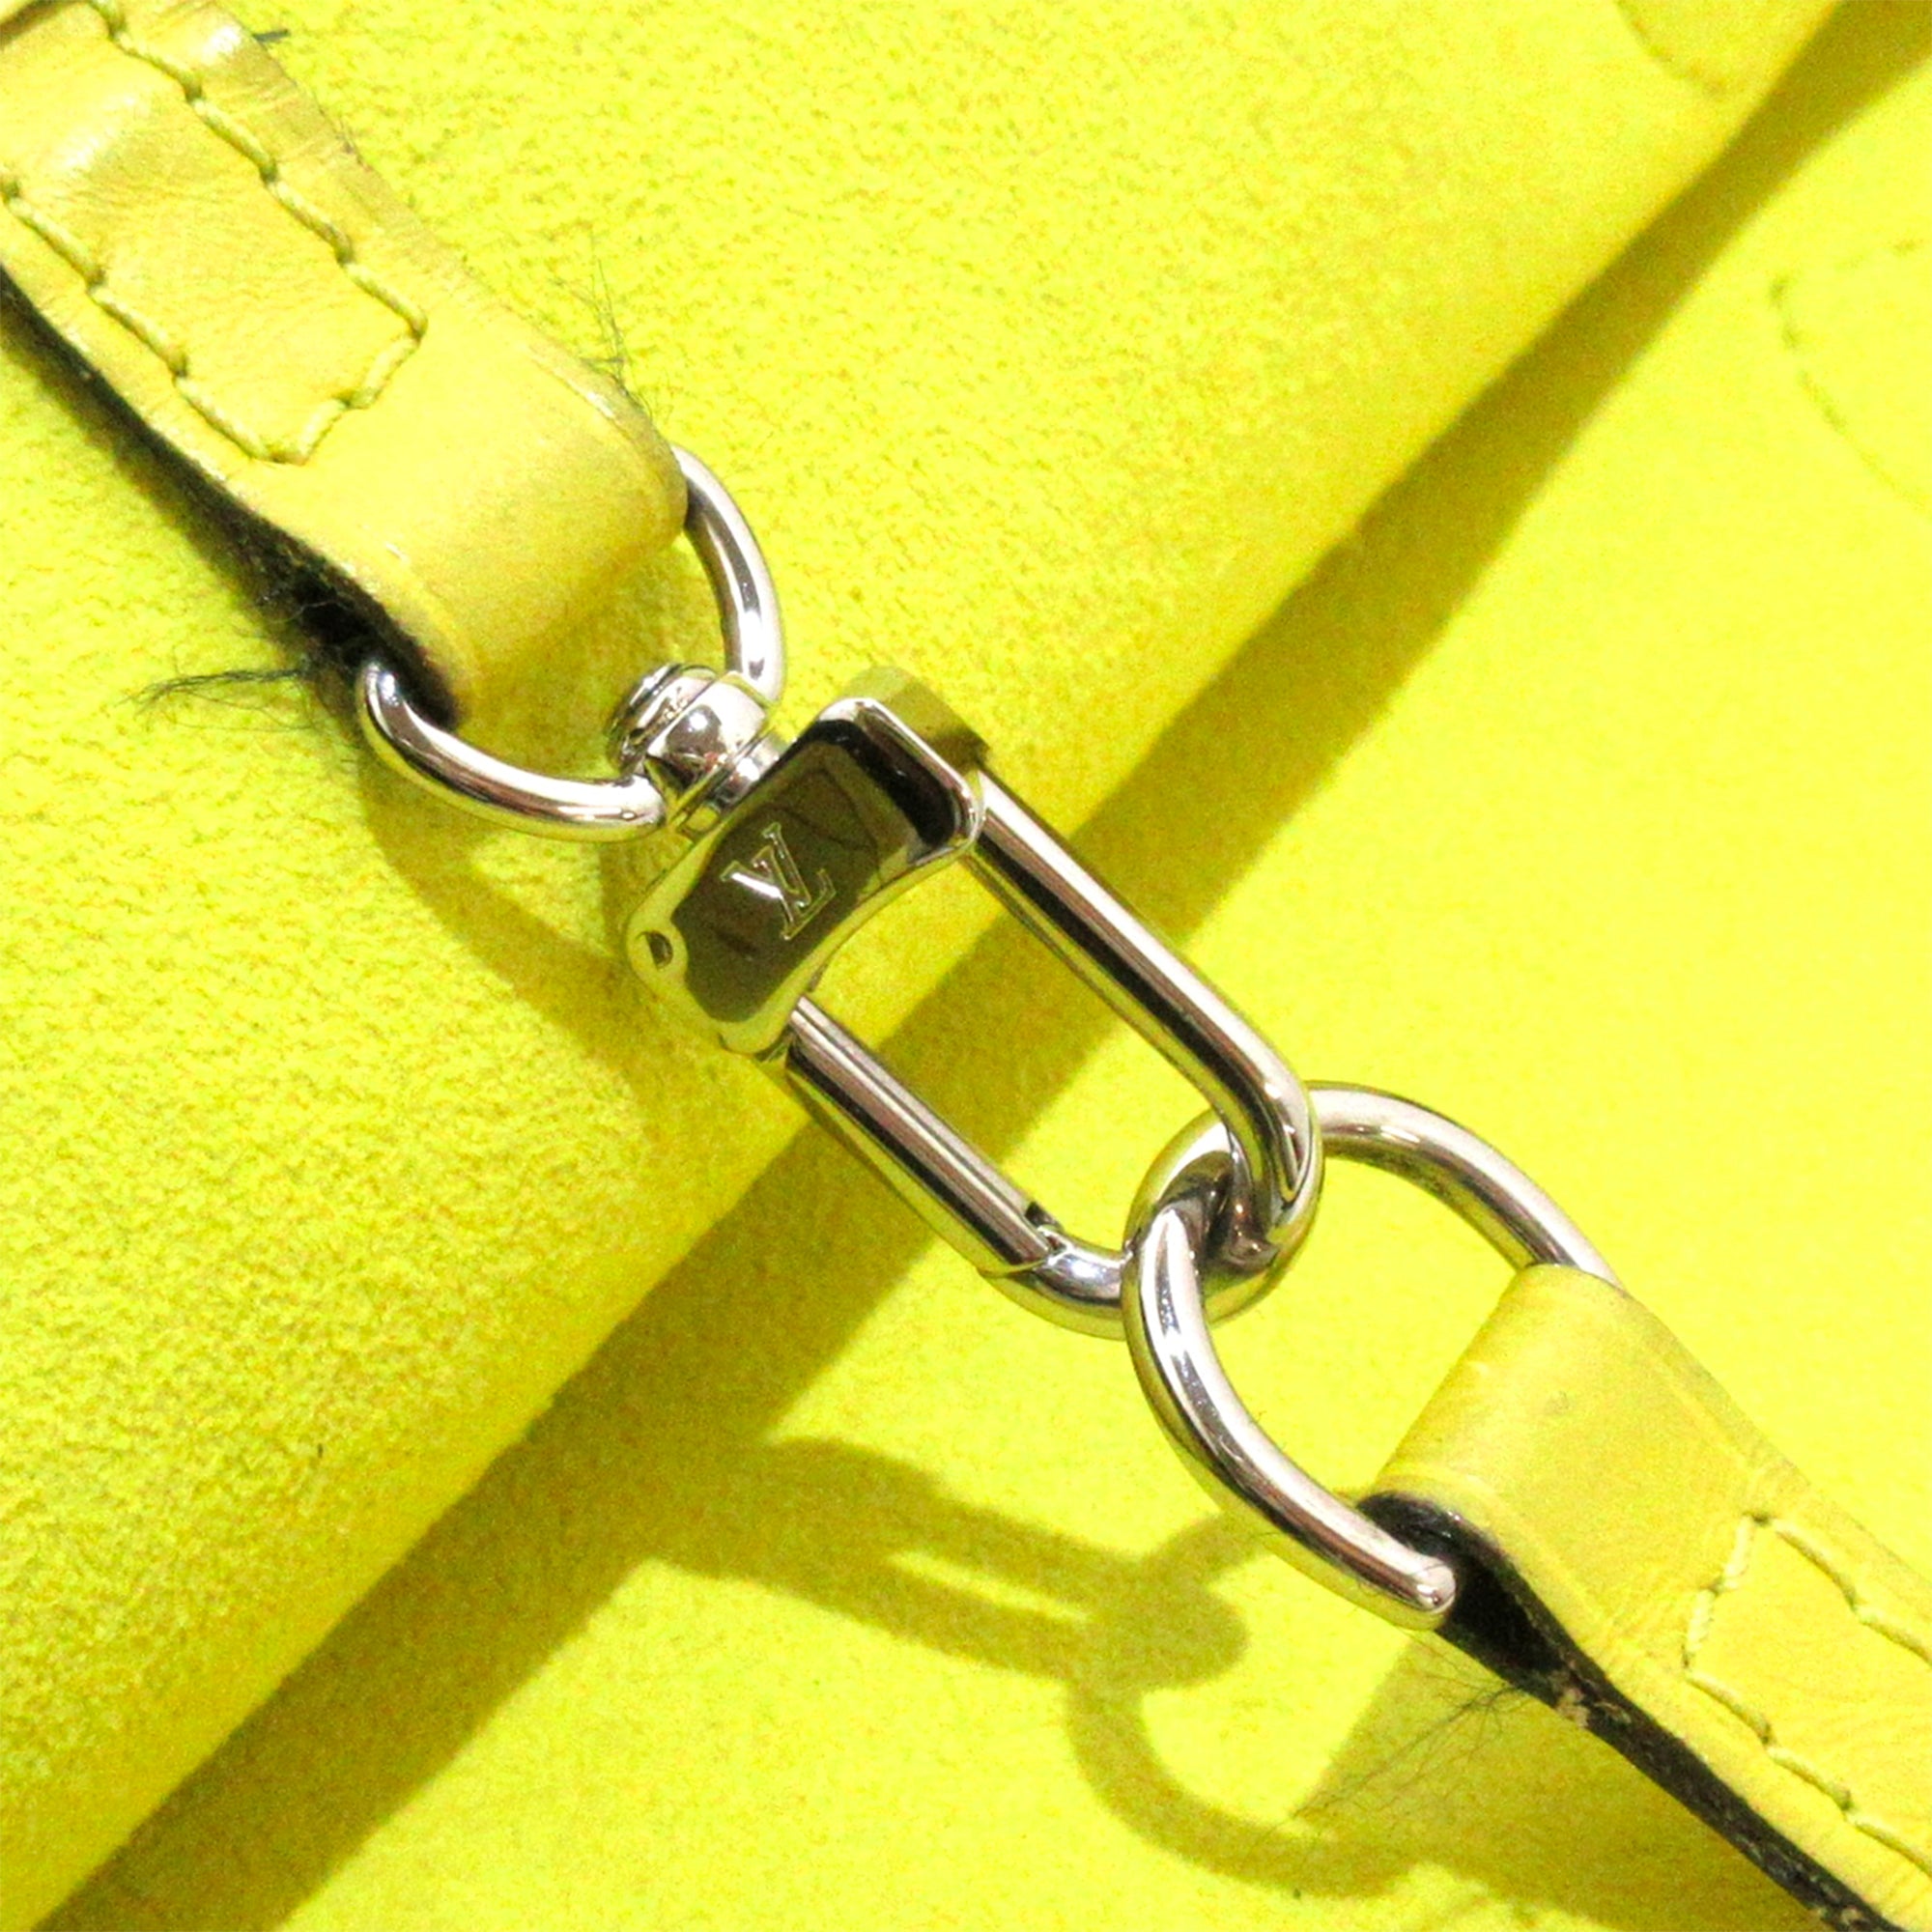 Louis Vuitton Yellow Epi Leather Neverfull MM Tote Bag – Reeluxs Luxury